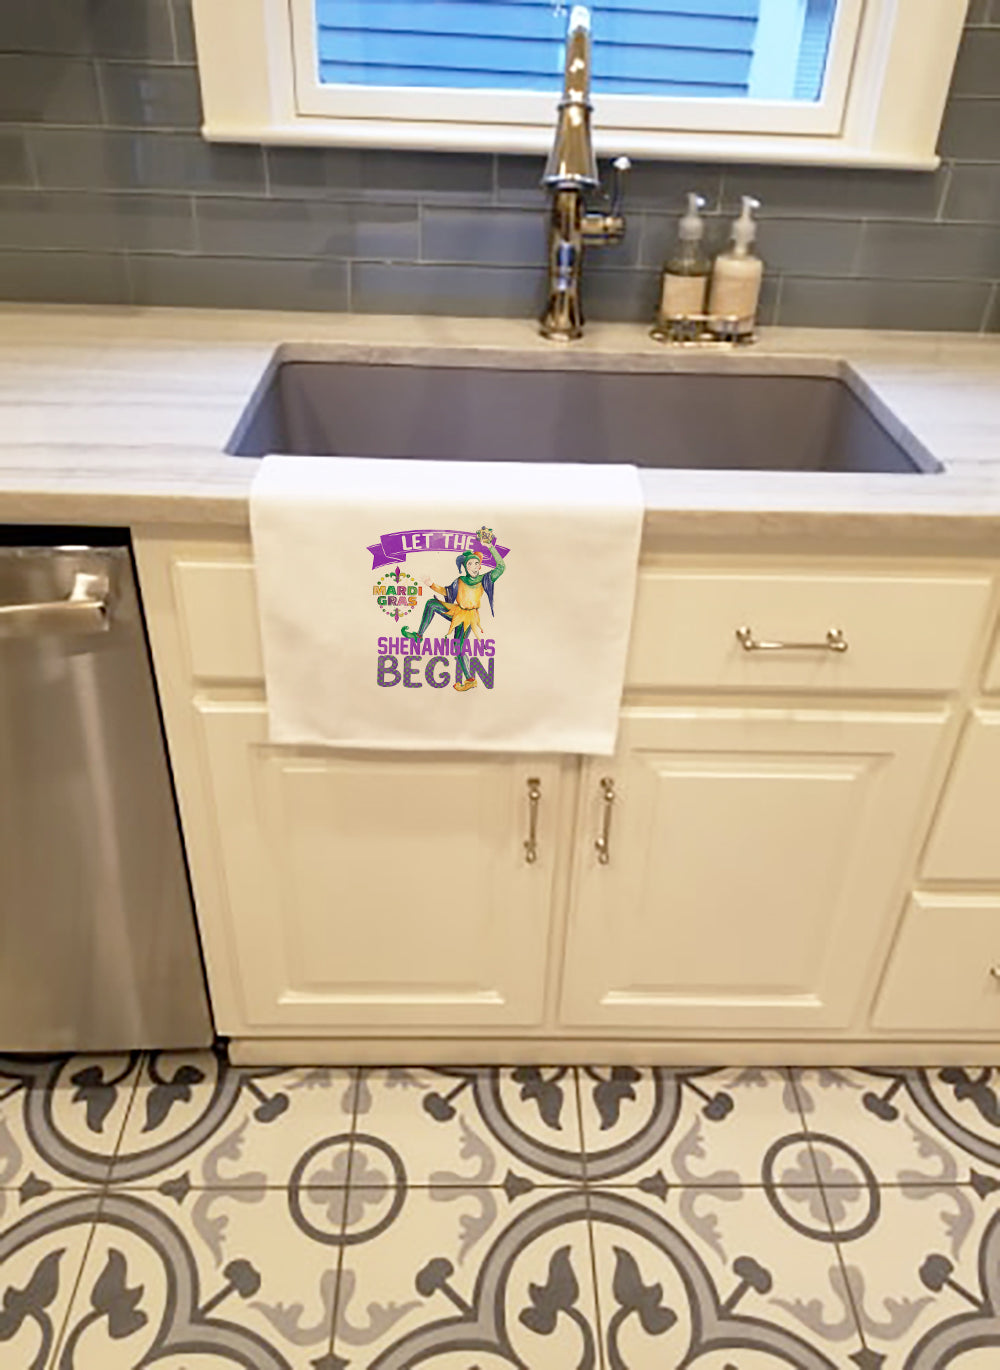 Let the Shenanigans Begin Mardi Gras White Kitchen Towel Set of 2 Dish Towels - the-store.com